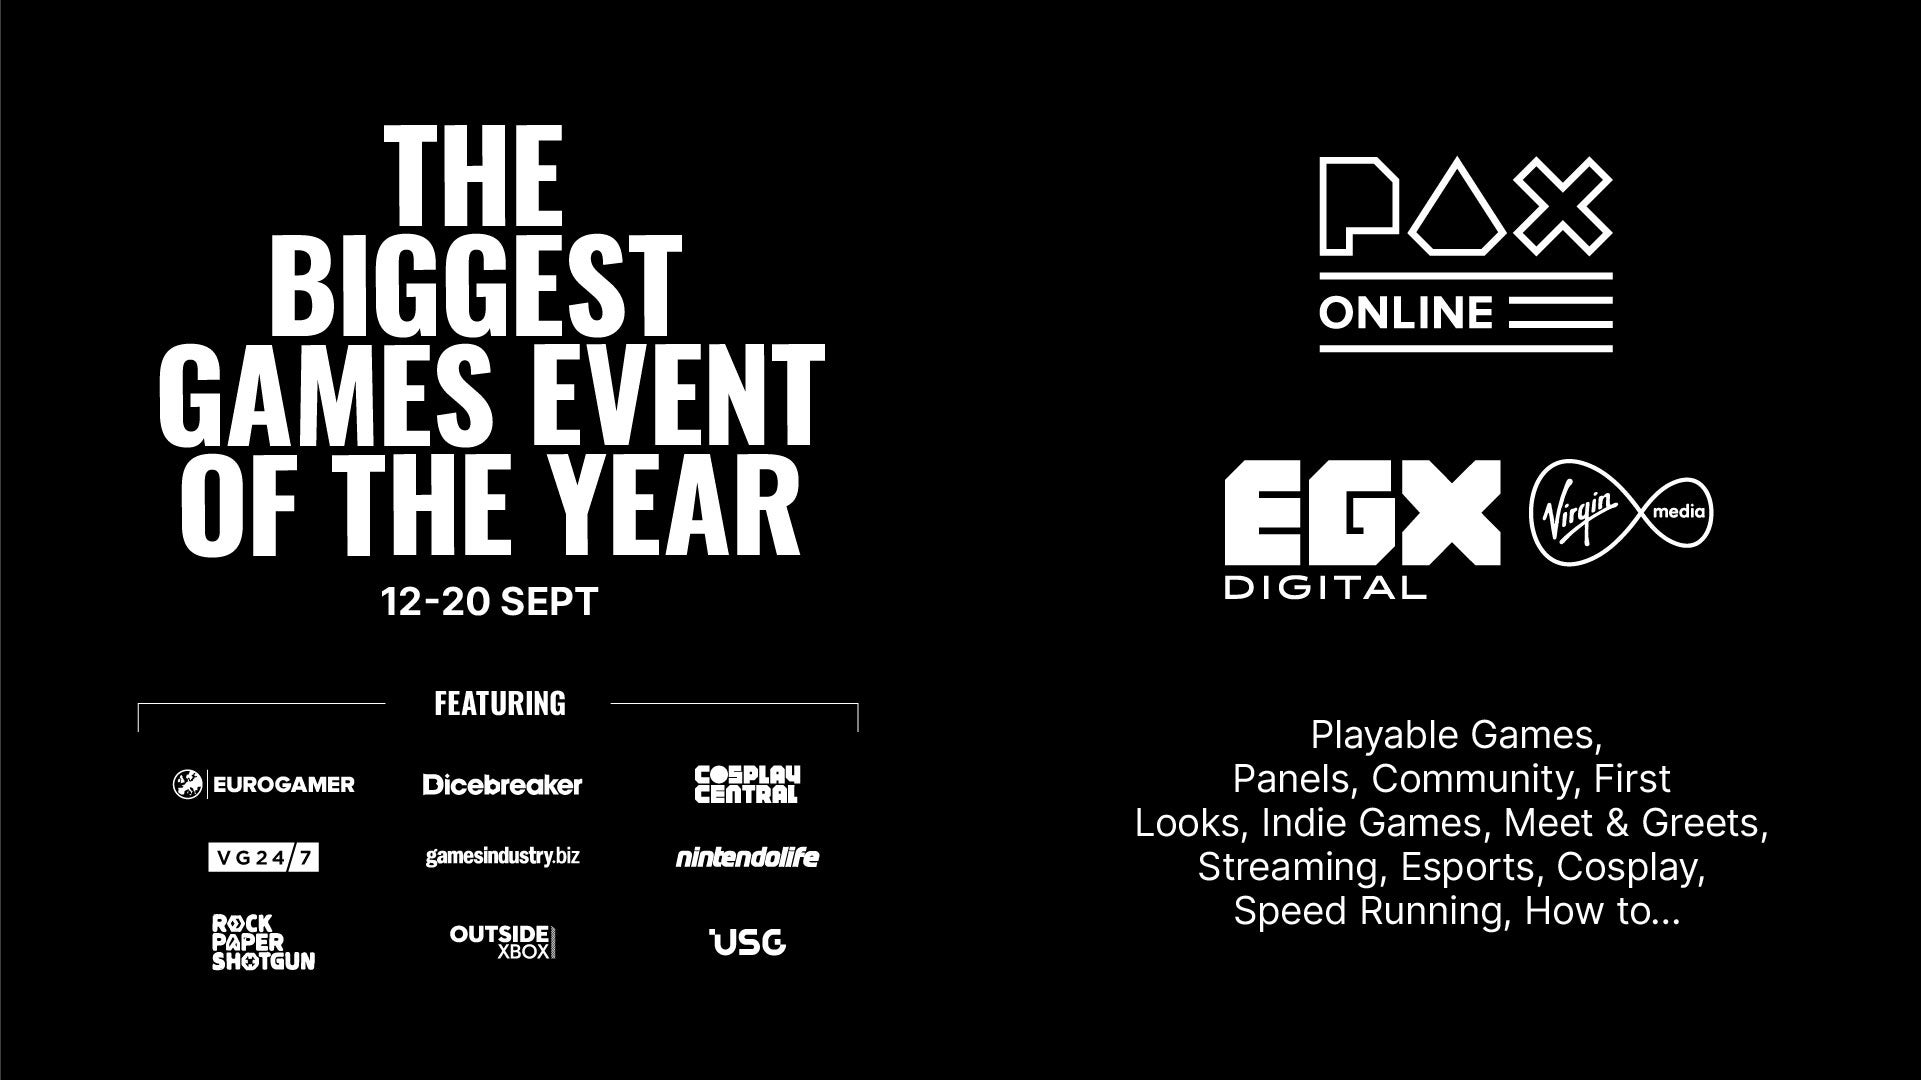 Image for You can be part of PAX Online and EGX Digital by submitting your panel ideas